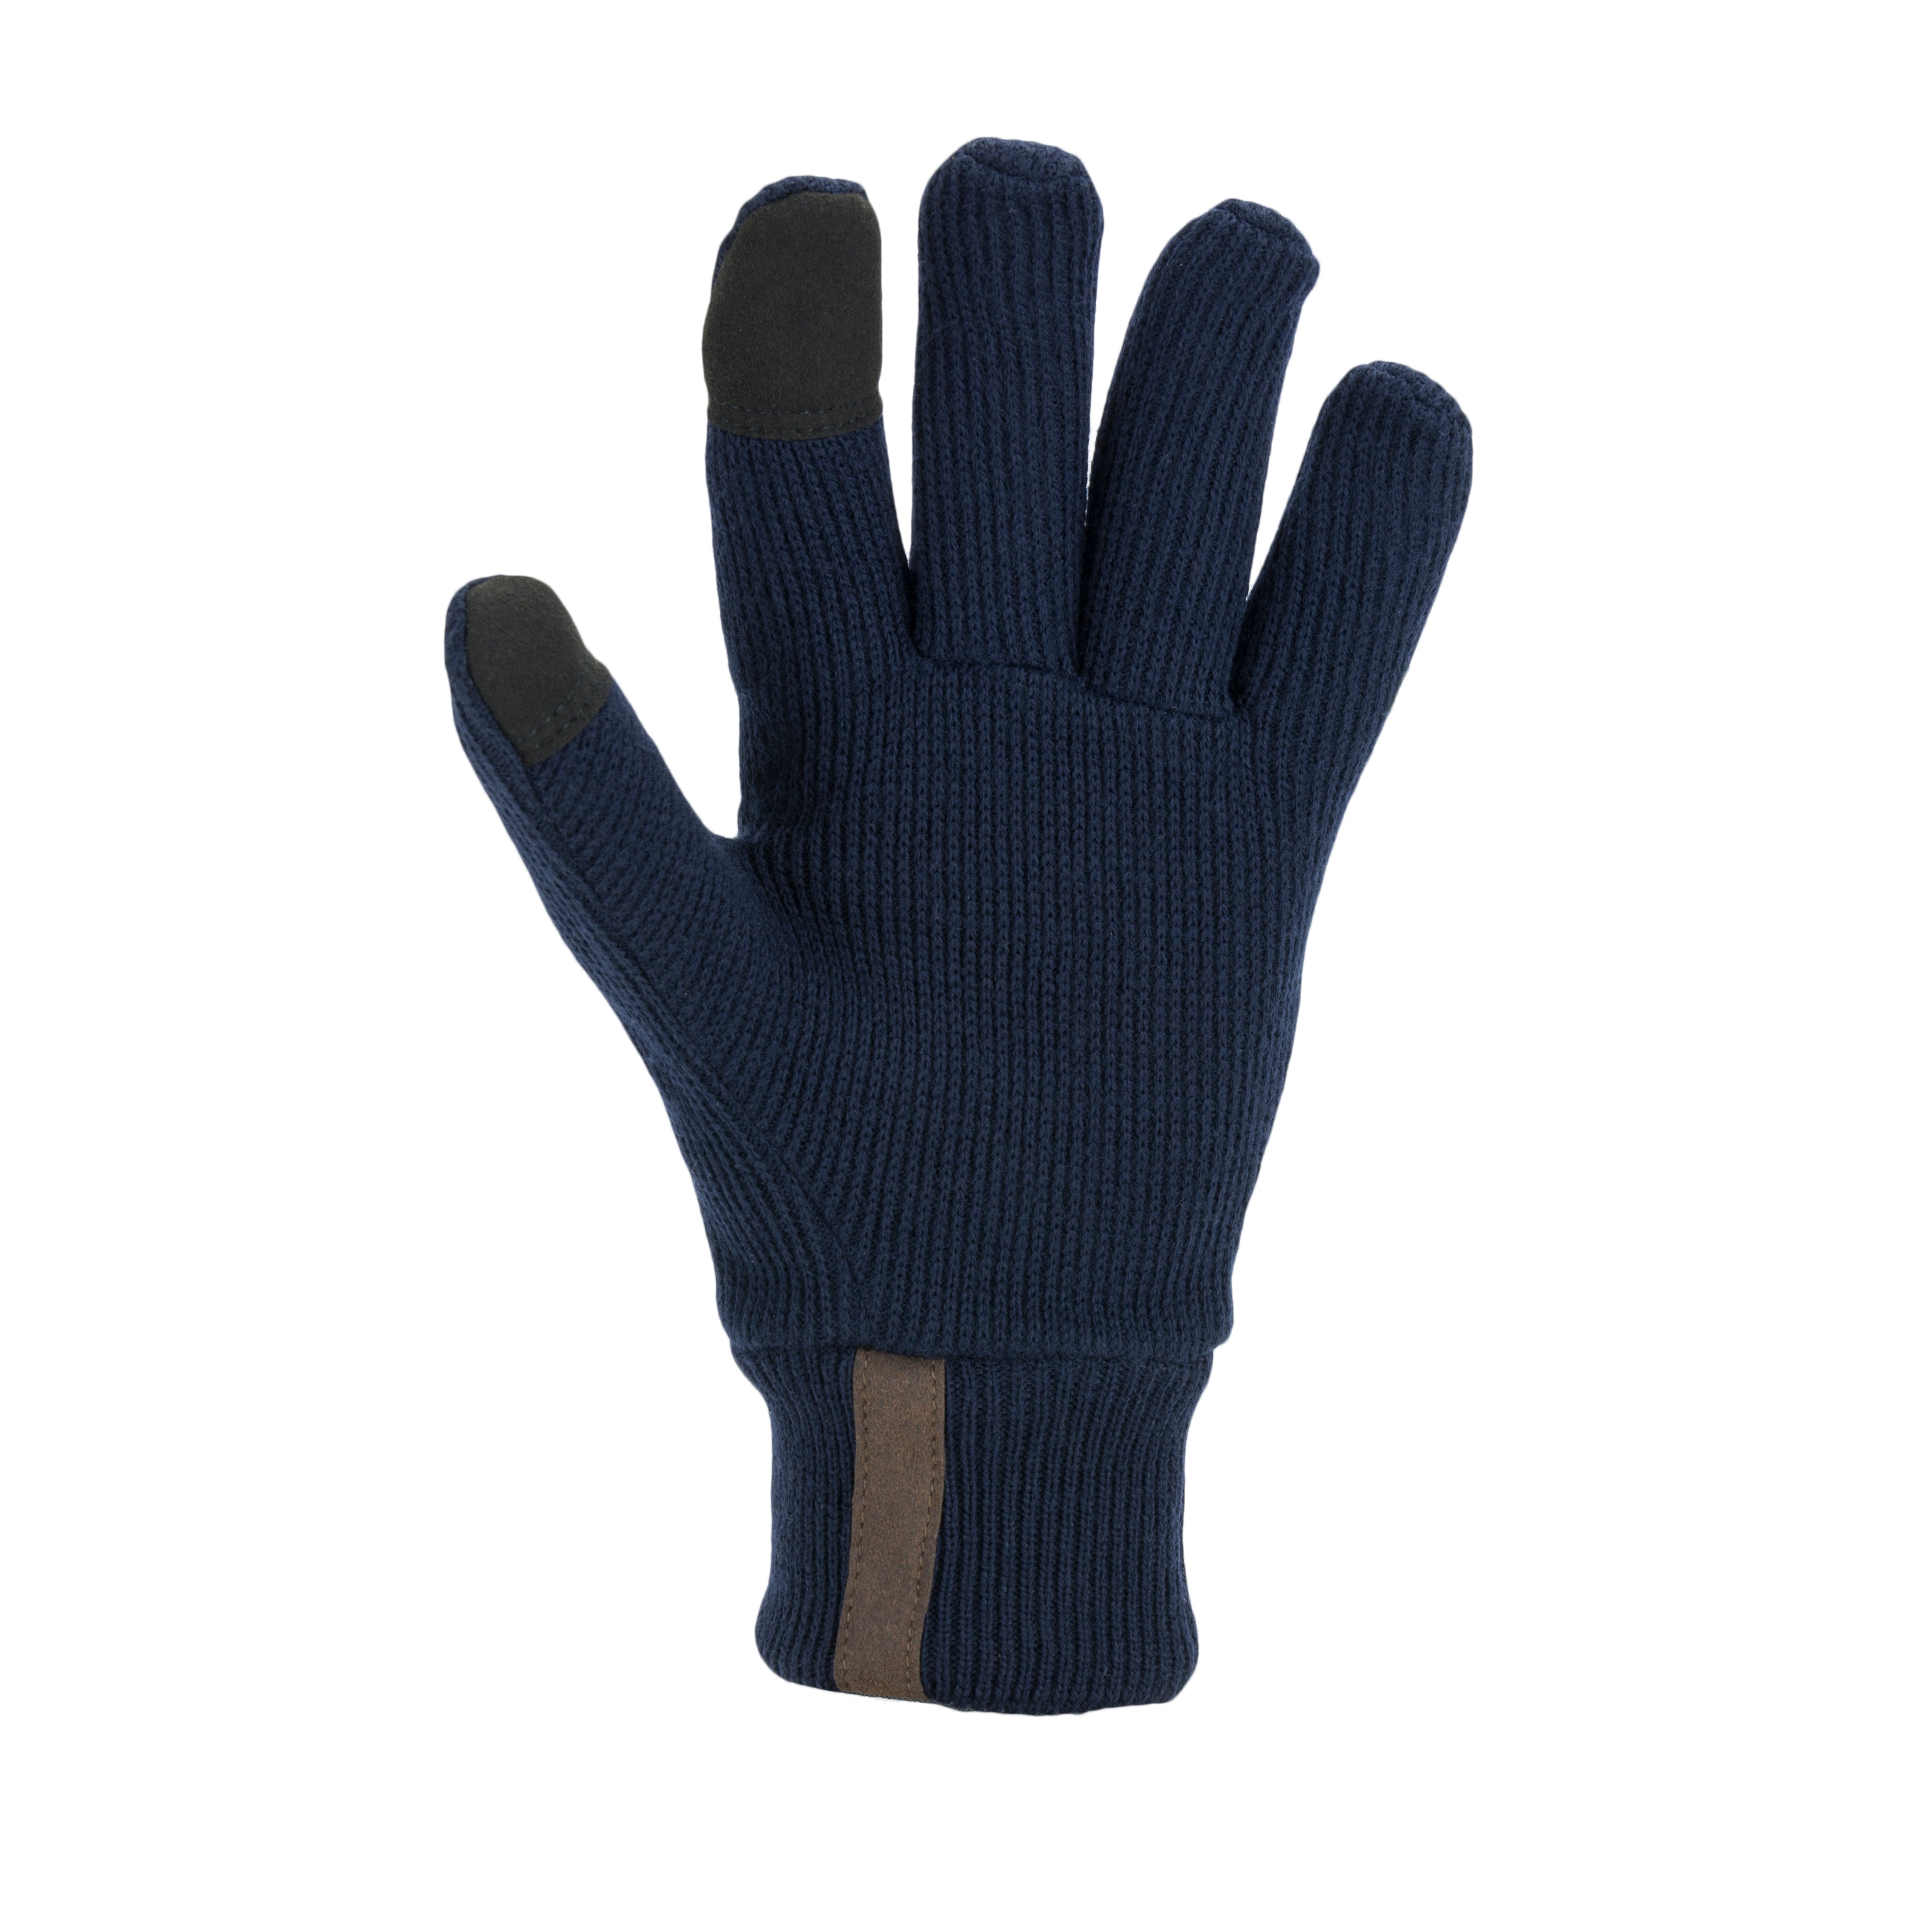 Windproof All Weather Knitted Glove - Size: S, M, L, XL - Color: Black, Grey, Dark Navy, Red